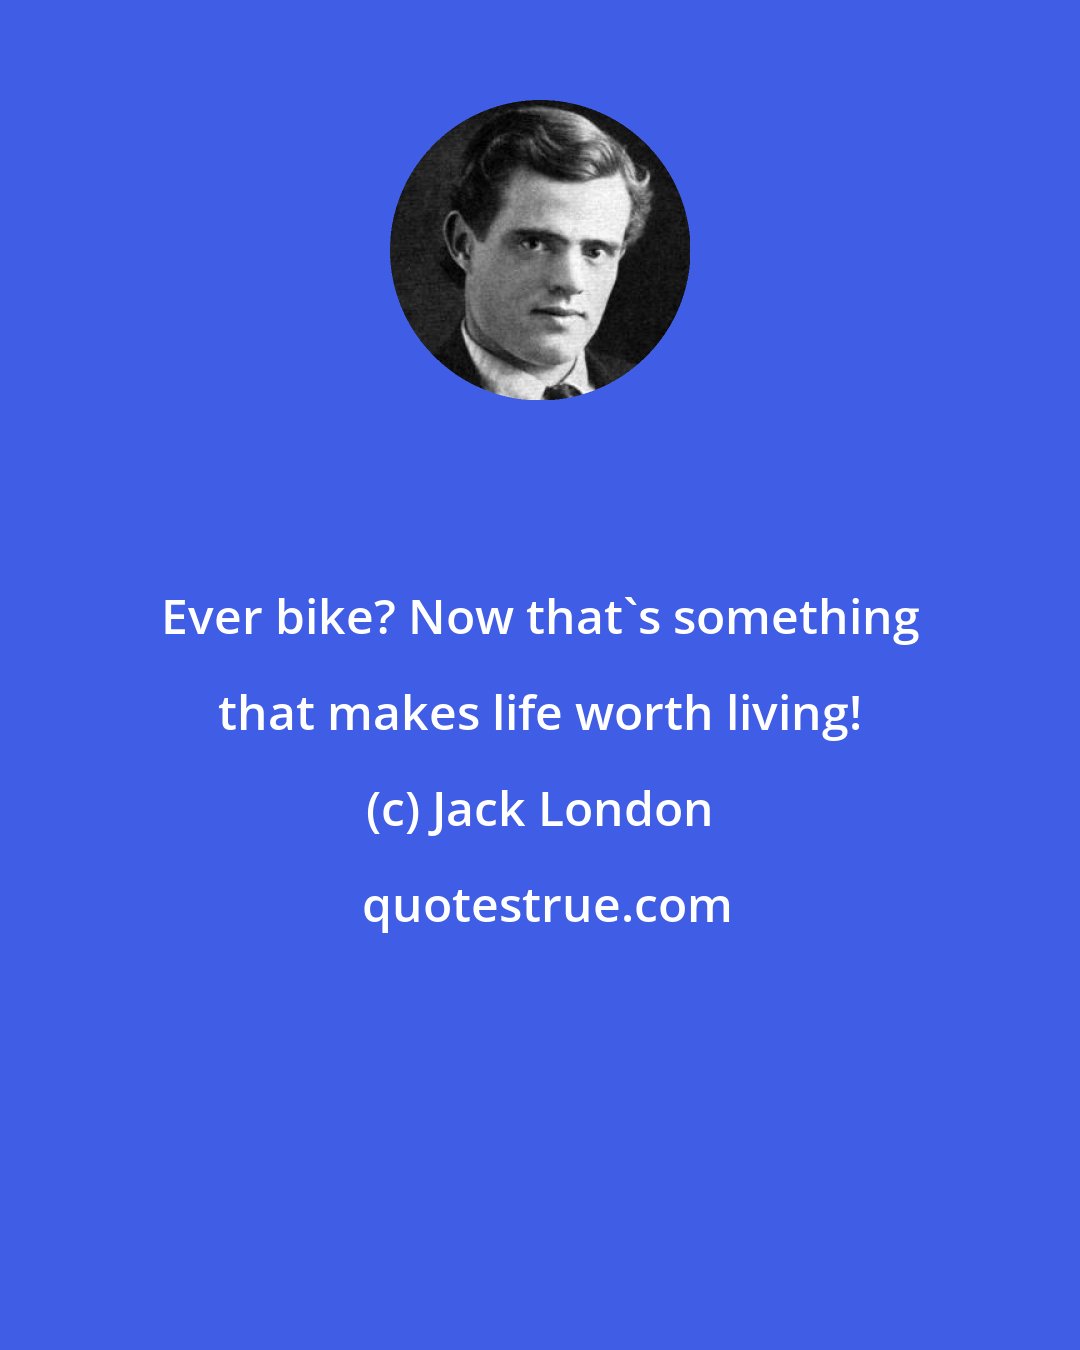 Jack London: Ever bike? Now that's something that makes life worth living!